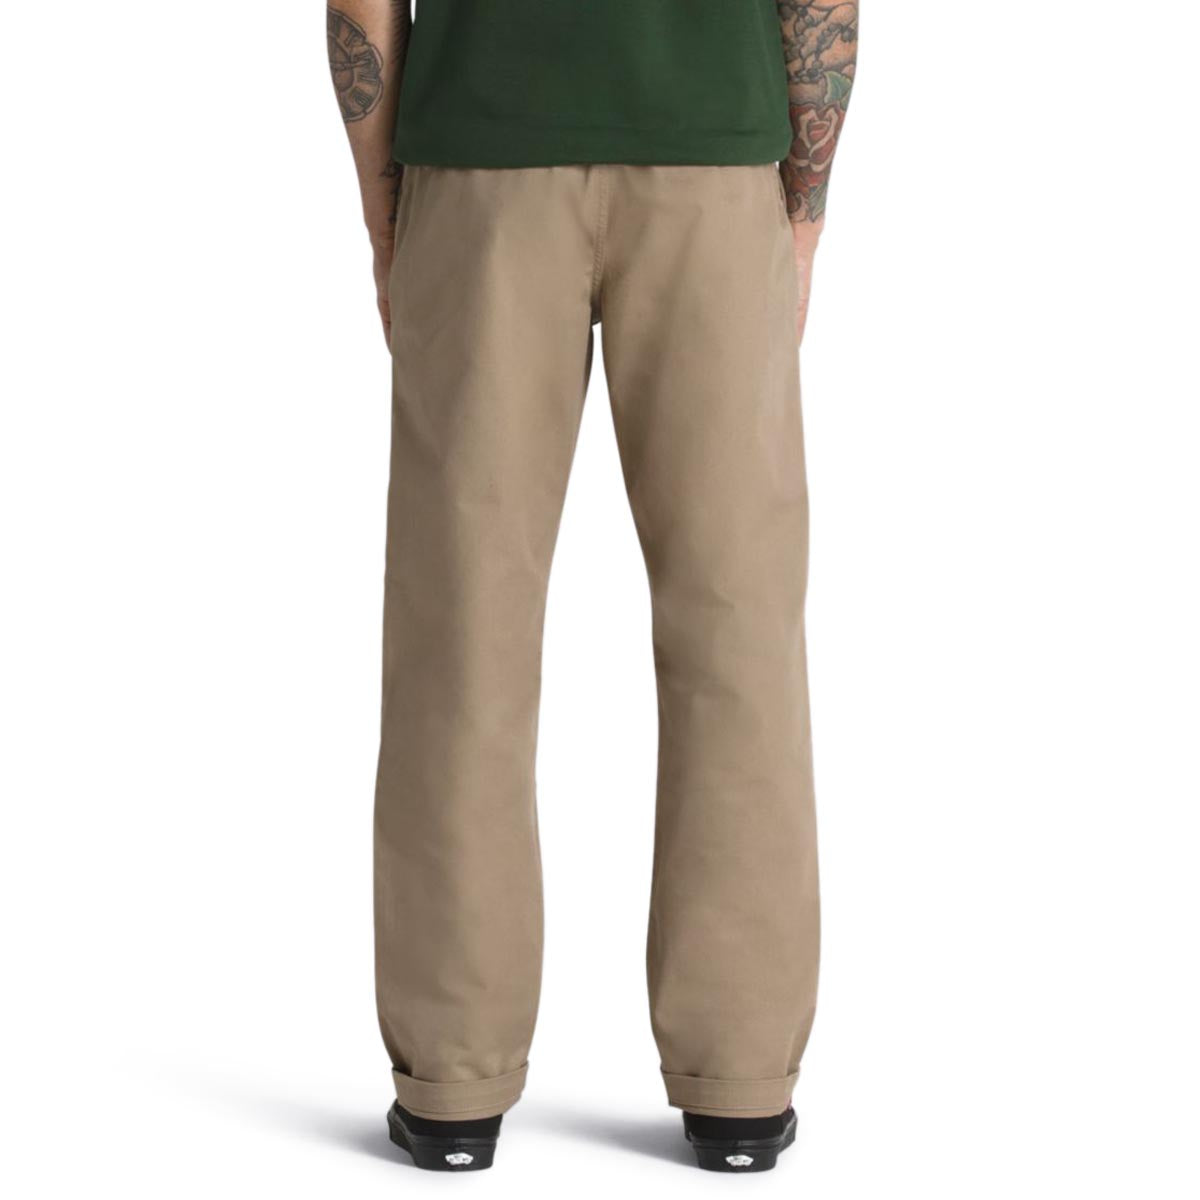 Vans Authentic Chino Relaxed Pants - Desert Taupe image 2